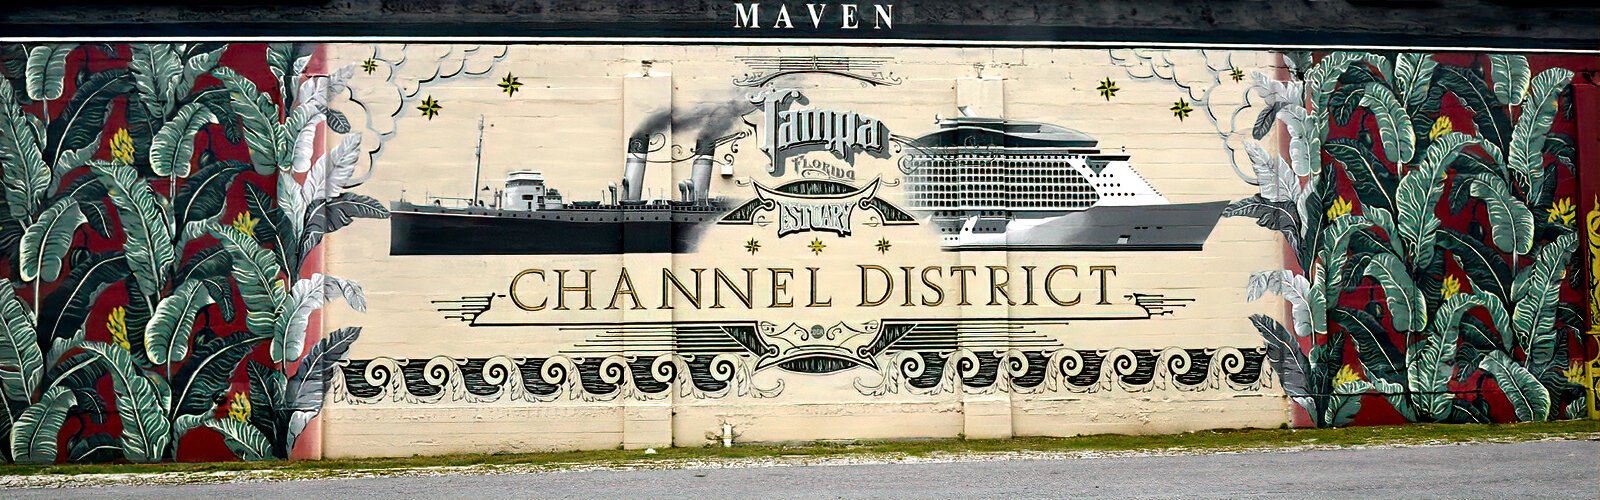 A beautifully detailed mural depicting Tampa’s past and present maritime history adorns one side of Maven Designs building in the Channel District.